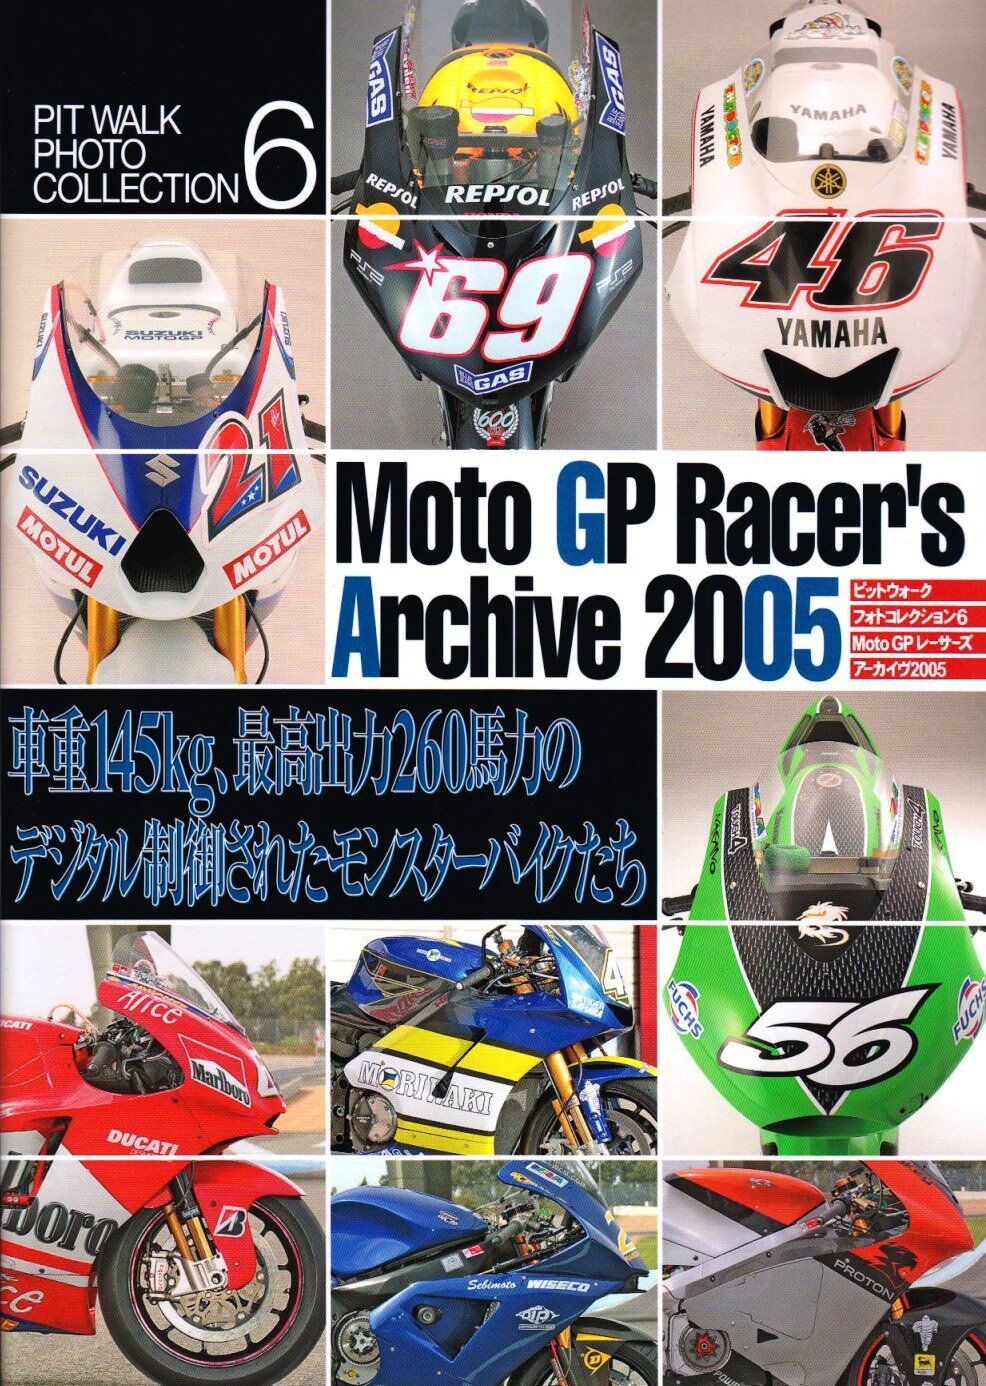 Moto GP Racer\'s Archive 2005 Photo Pit Walk Collection 6 Book